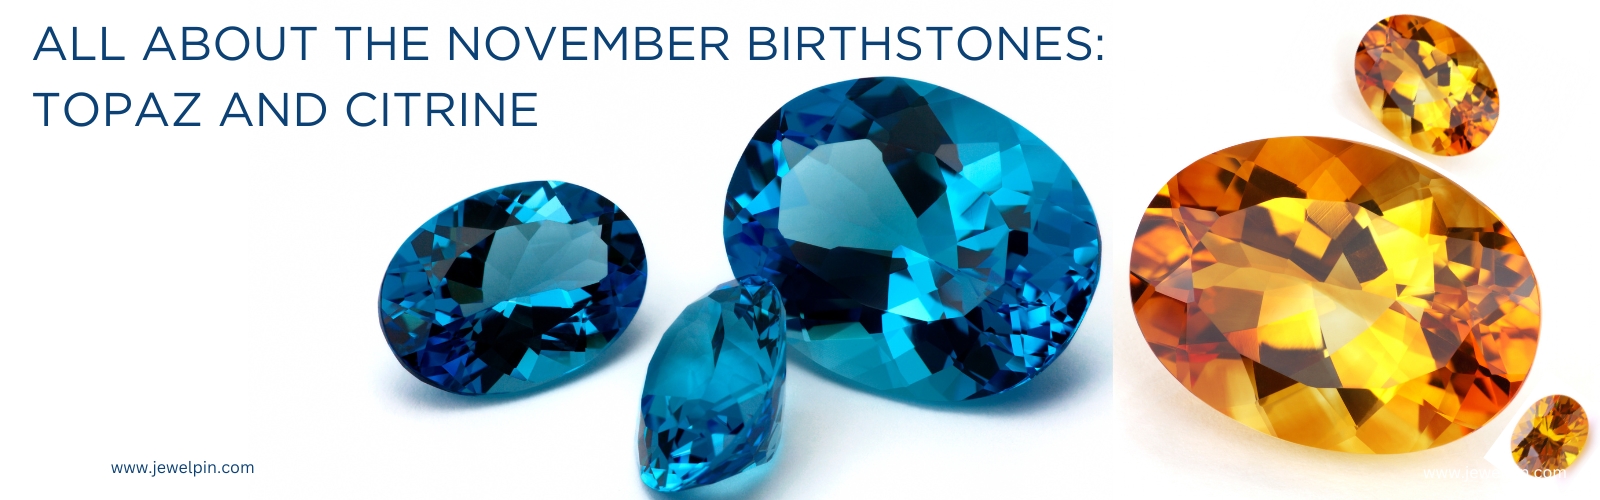 all about the november birthstones topaz and citrine